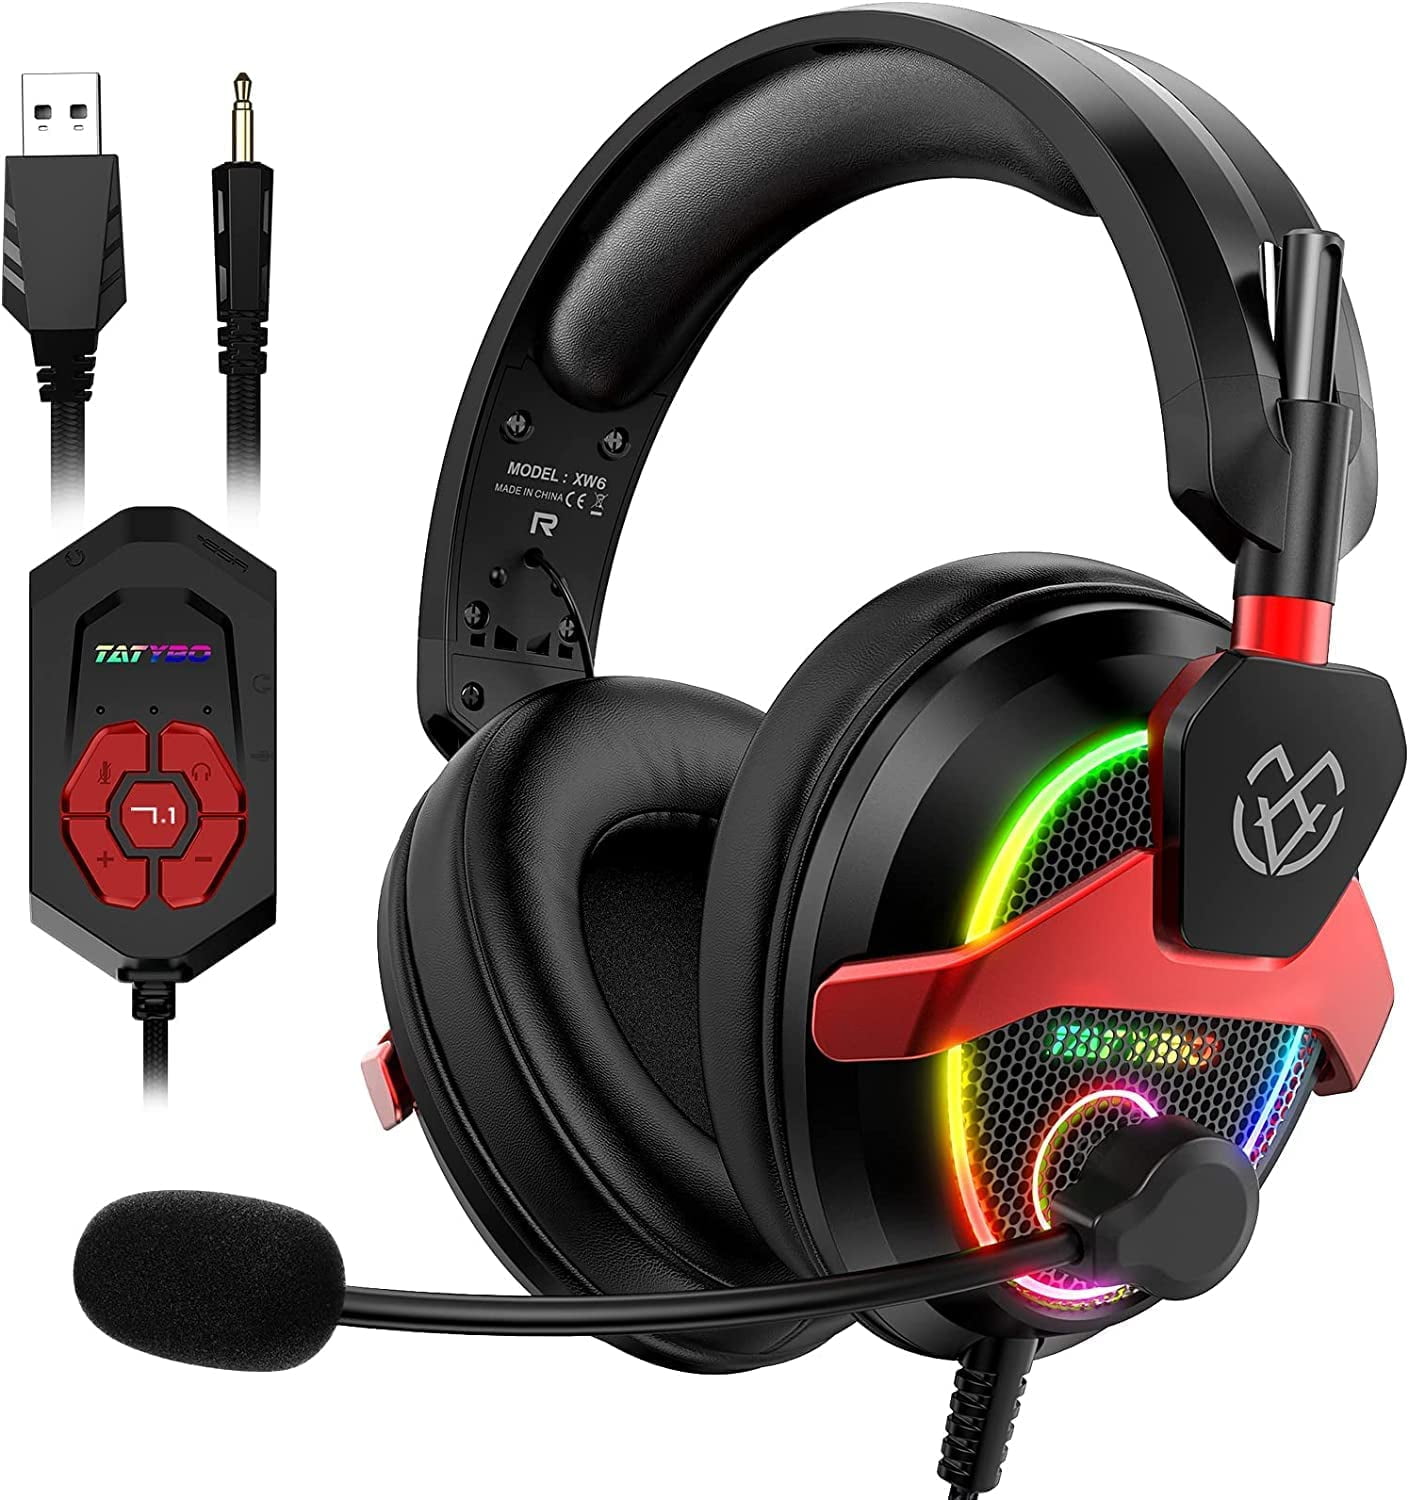 PC Mac, Surround Multi-Platform White and Compatibility, HS65 Sound Headset; Corsair Surround 7.1 on Audio Dolby Gaming